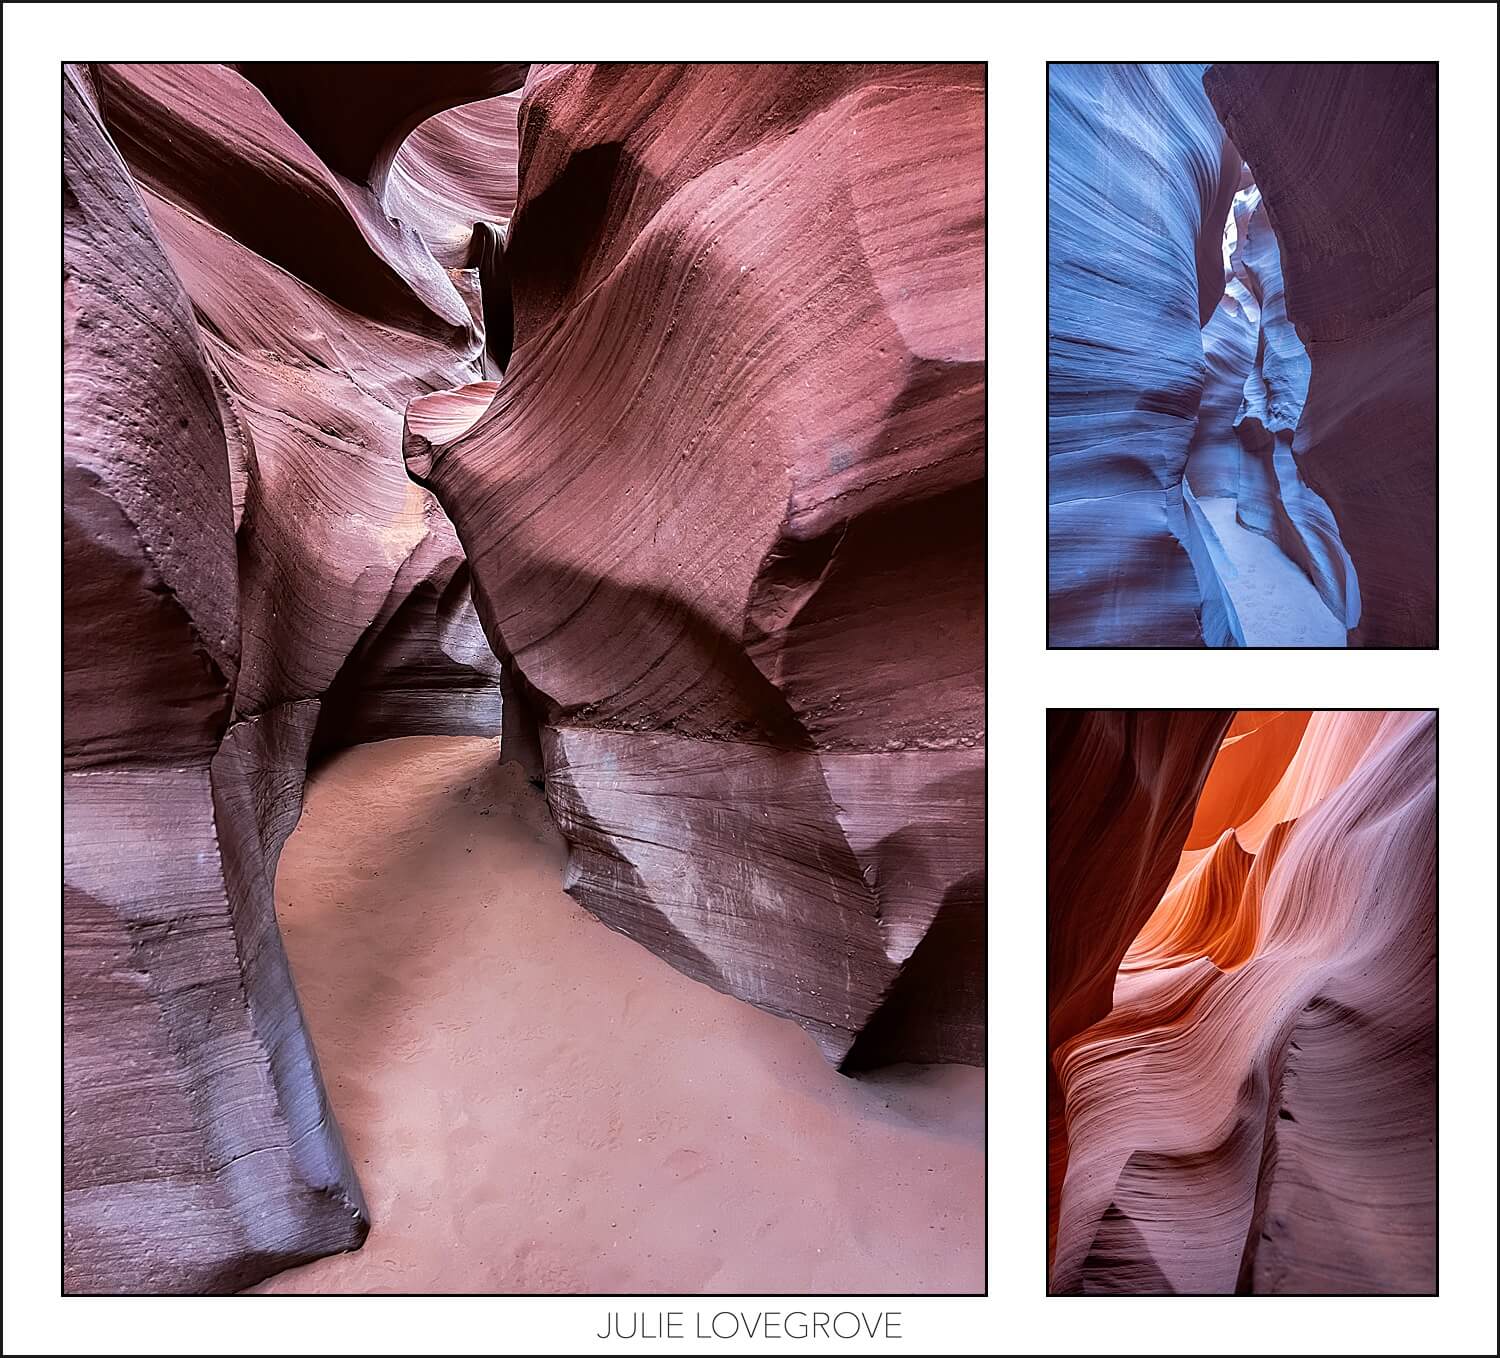 The sunlight entering lower Antelope Canyon gives the rocks interest.